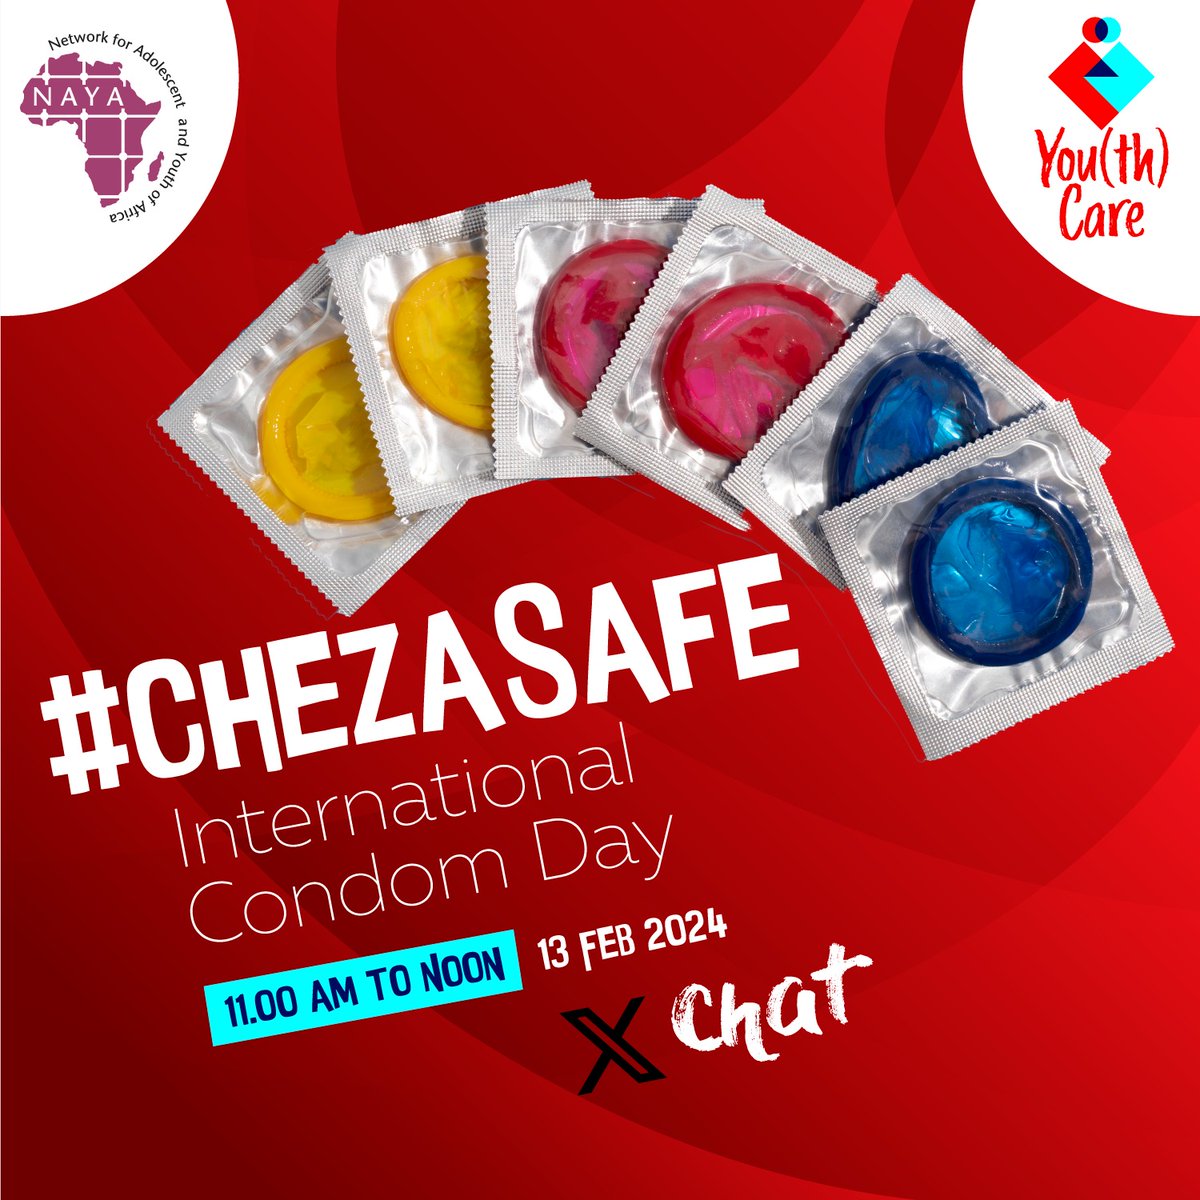 As you and your partner(s) plan to celebrate Valentine’s Day, a good way to celebrate your love for each other is to use condoms during sexual activities. Constant and correct use of condoms prevents pregnancies and S.T.Ds such as H.I.V./AIDS. #ChezaSafe @NAYAKenya